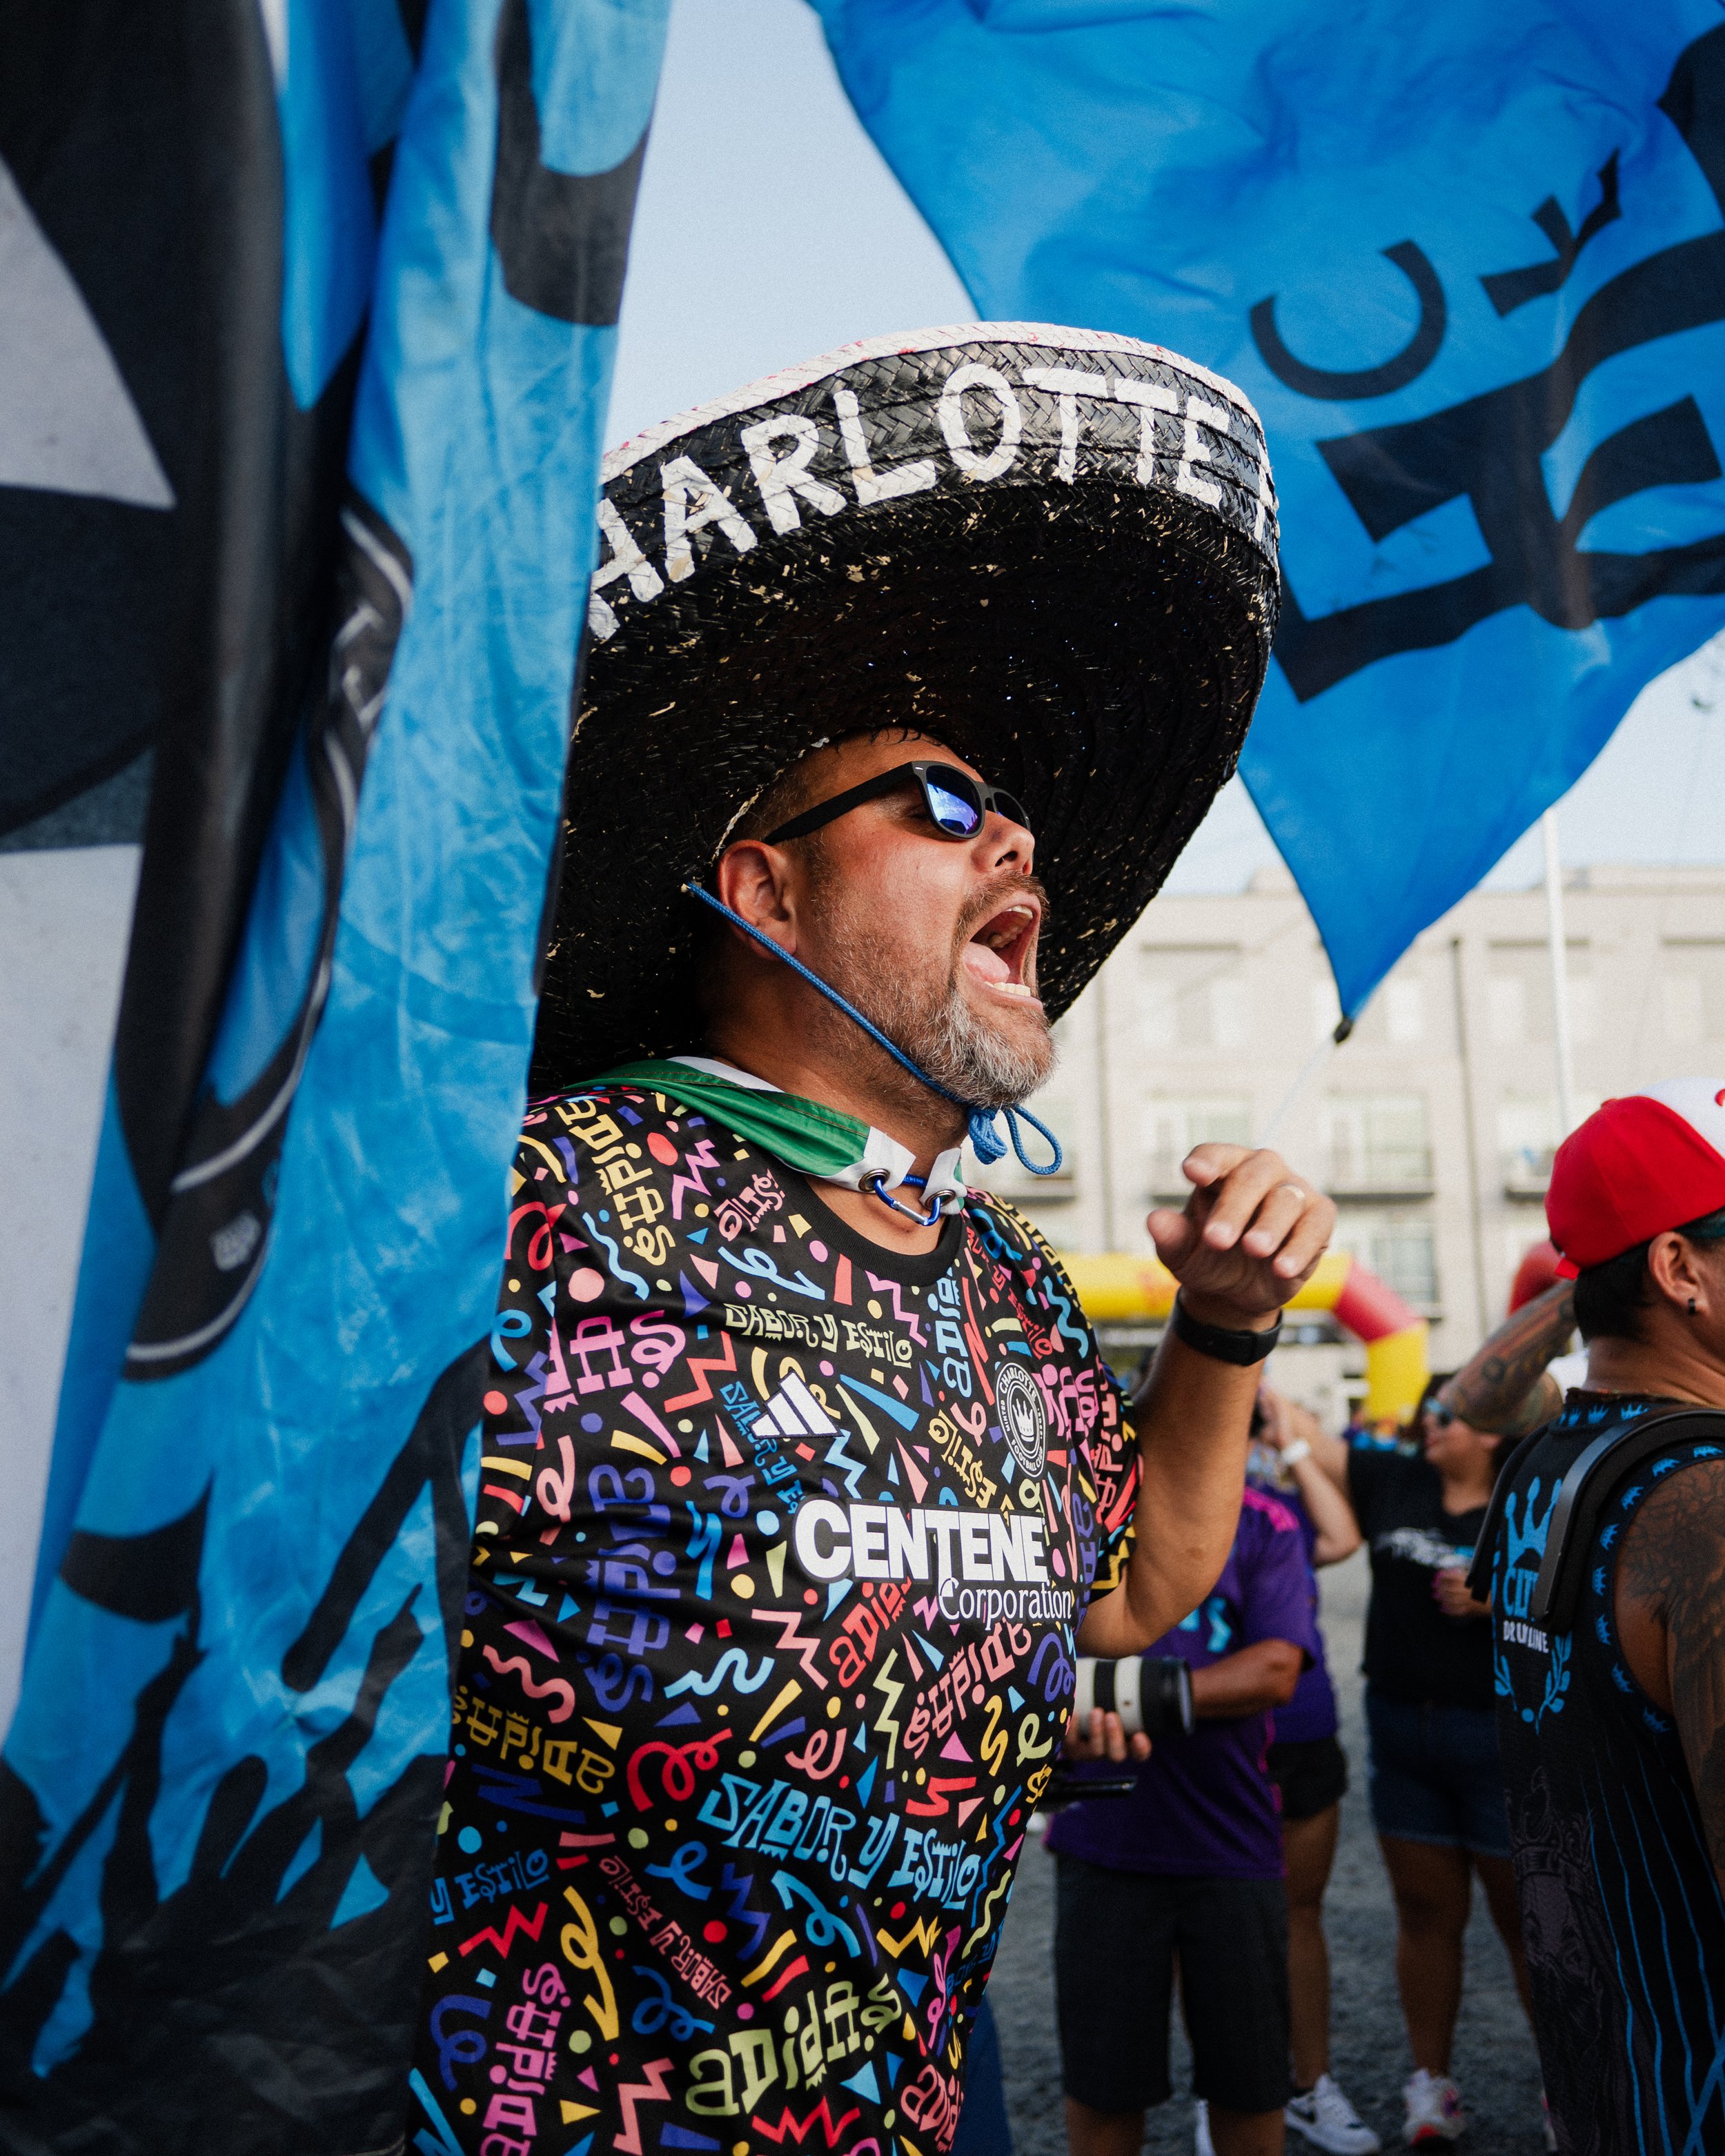 Hector – wearing his sombrero – sings at the tailgate surrounded by Charlotte FC flags.    